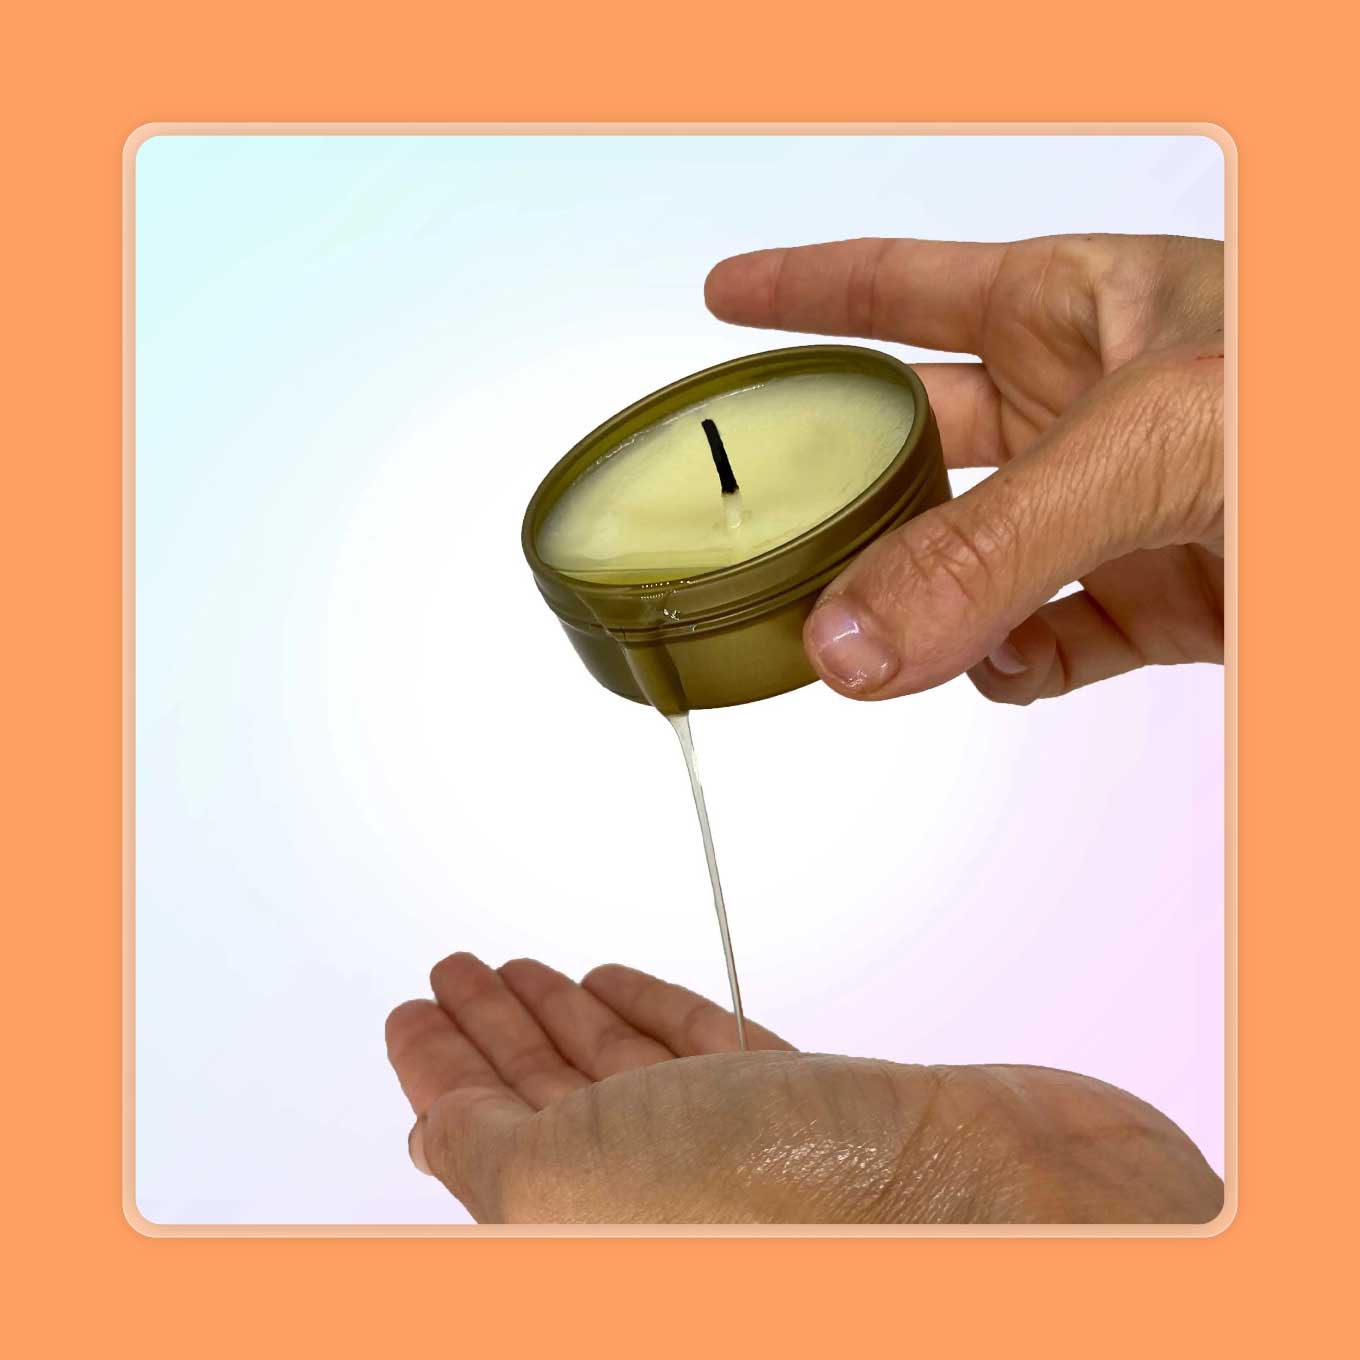 A hand pours wax from a massage candle into another hand